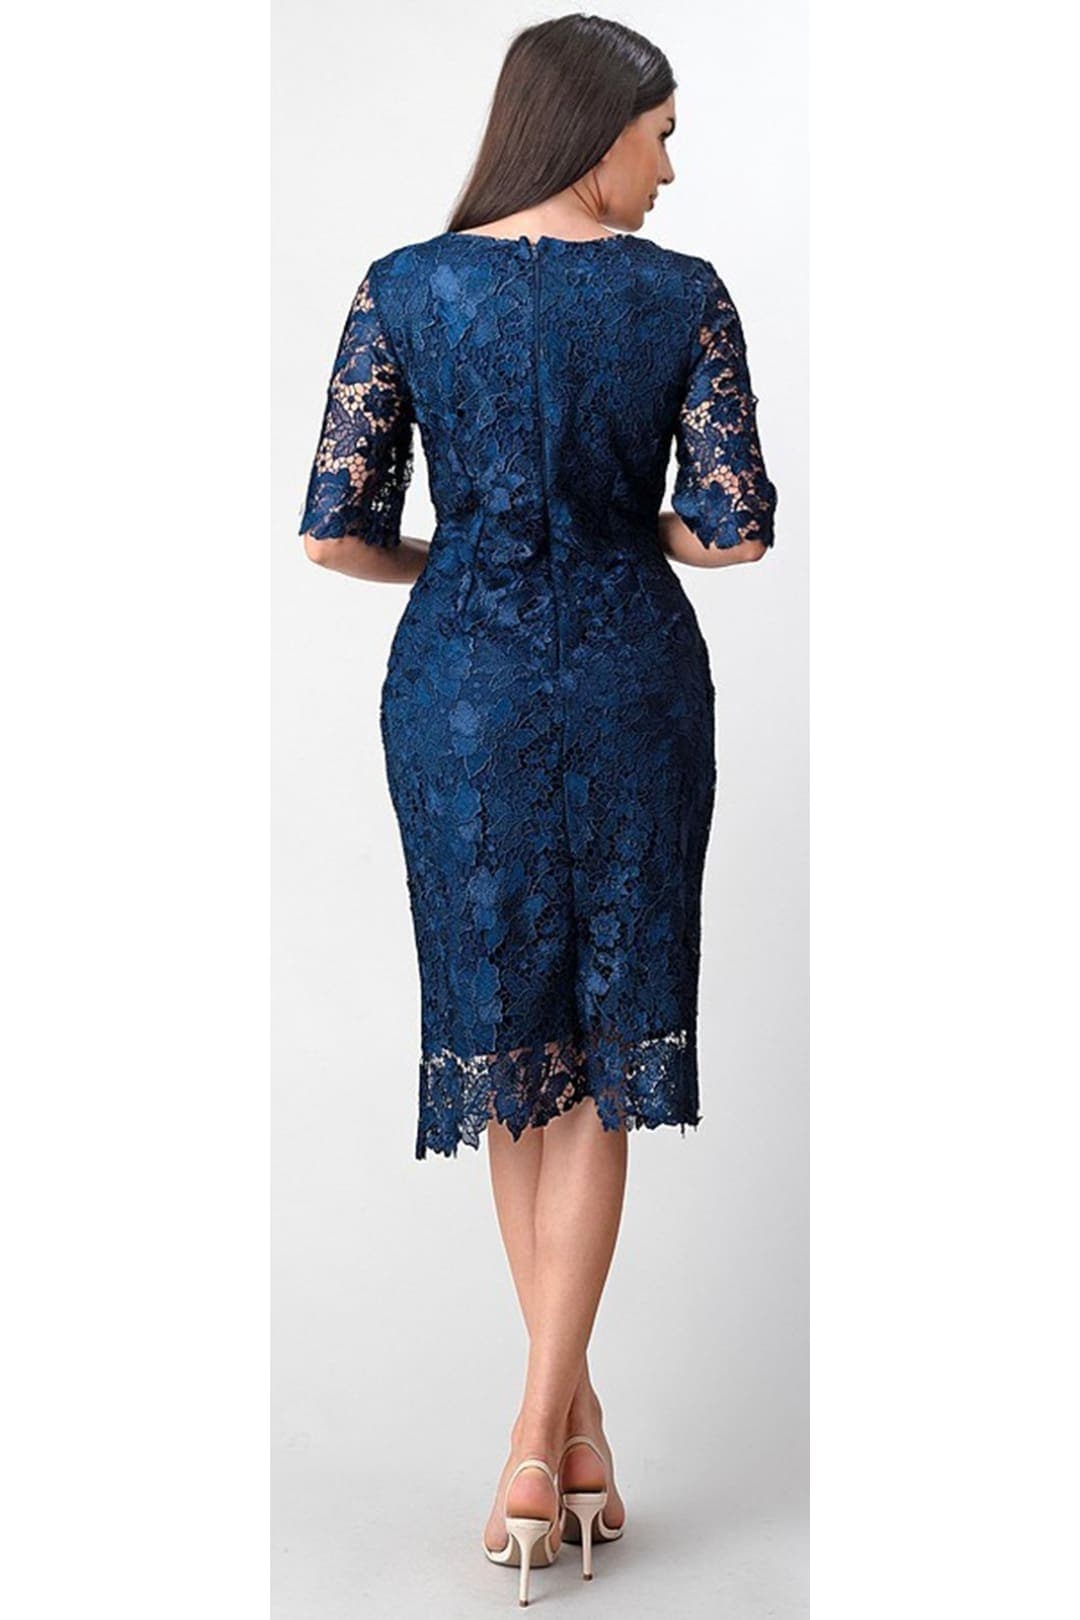 3/4 Sleeve Lace Cocktail Dress- GAMG8101